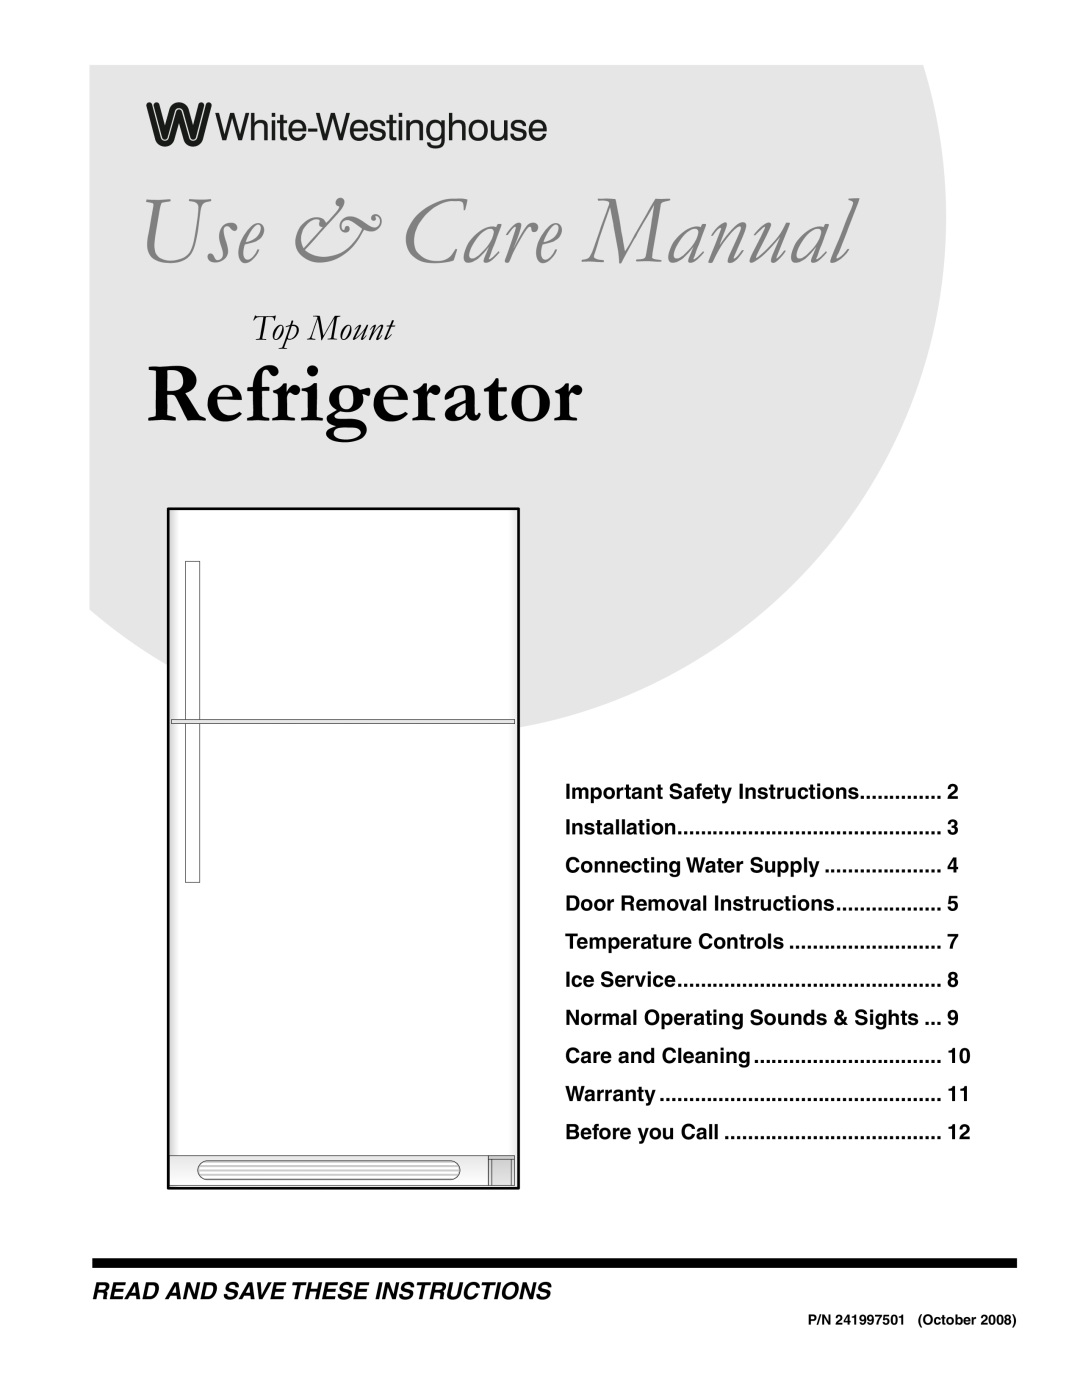 White-Westinghouse 241997501 important safety instructions Use & Care Manual, Refrigerator, Top Mount 